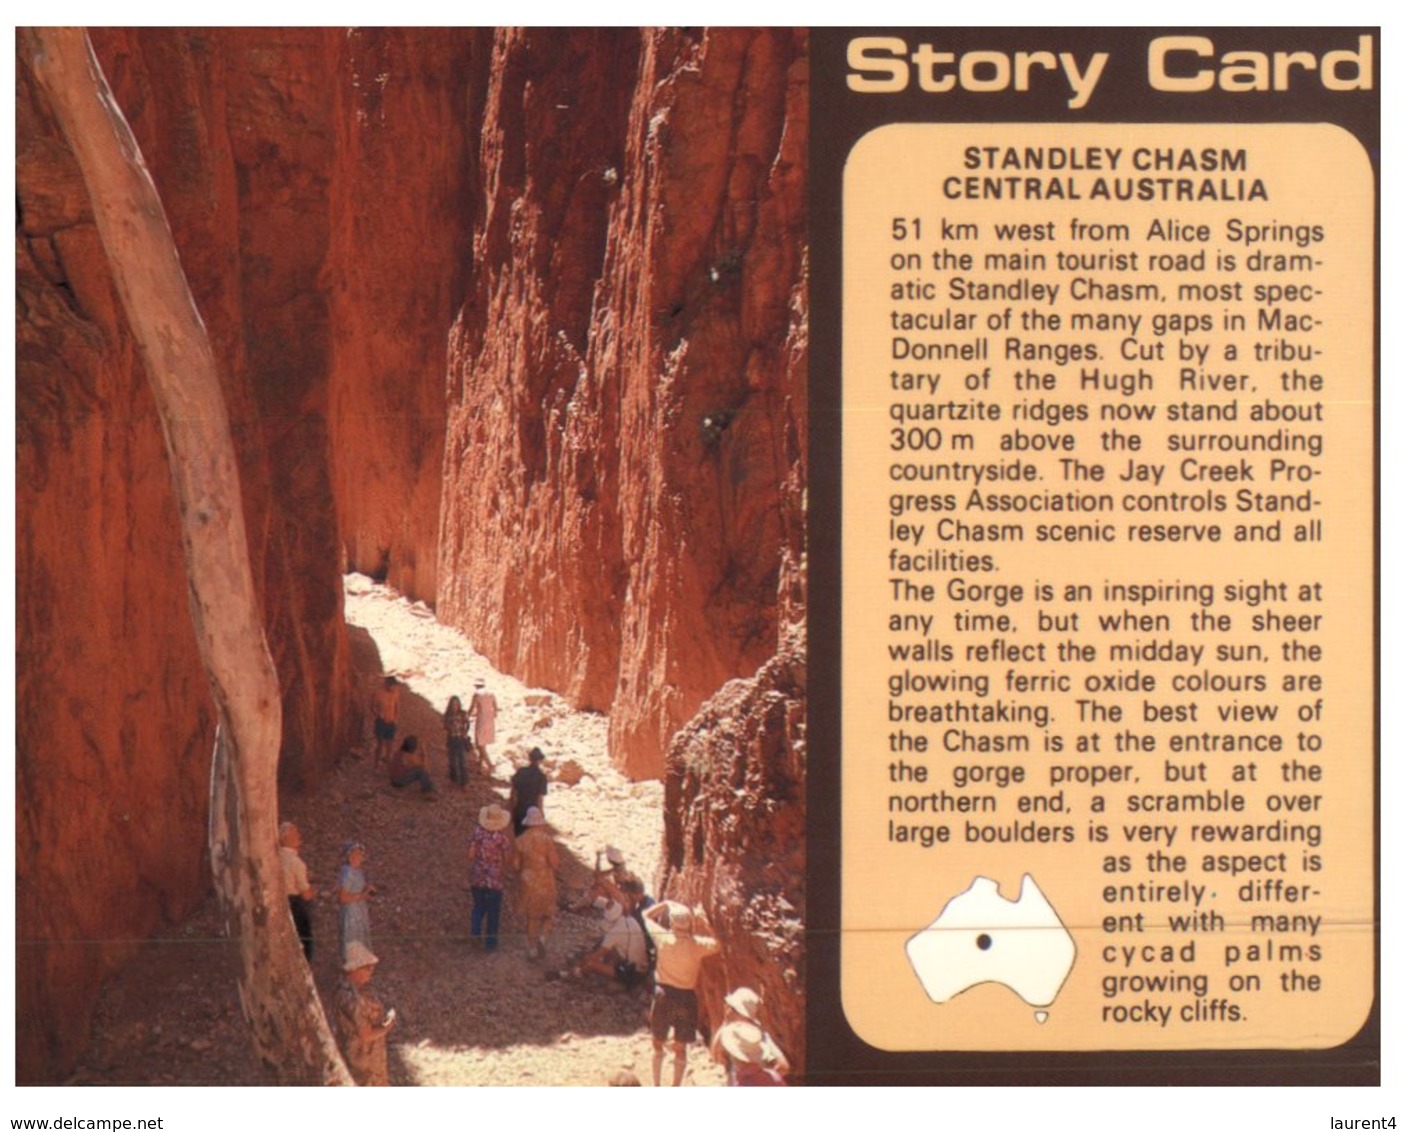 (4444) Australia - NT - Standley Chasm - The Red Centre